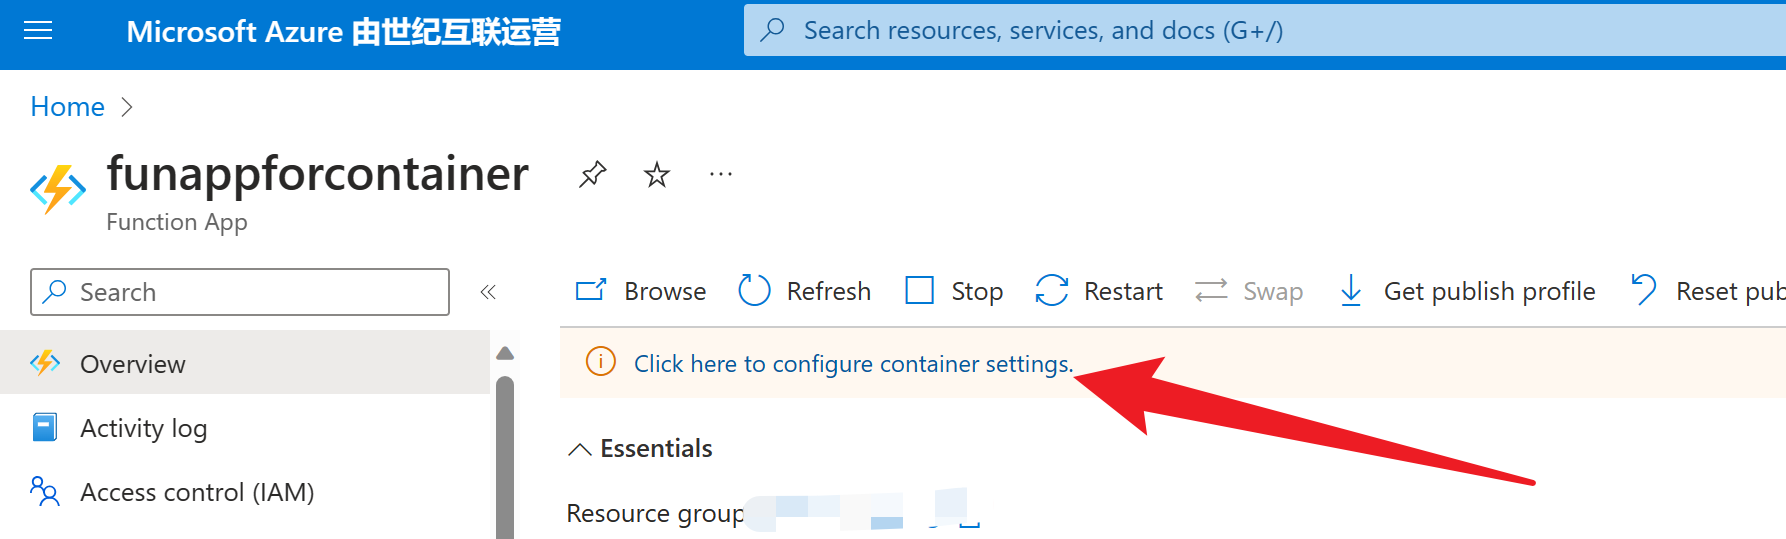 【Azure Function App】解决Function App For Container 遇见ServiceUnavailable的异常 _microsoft_02